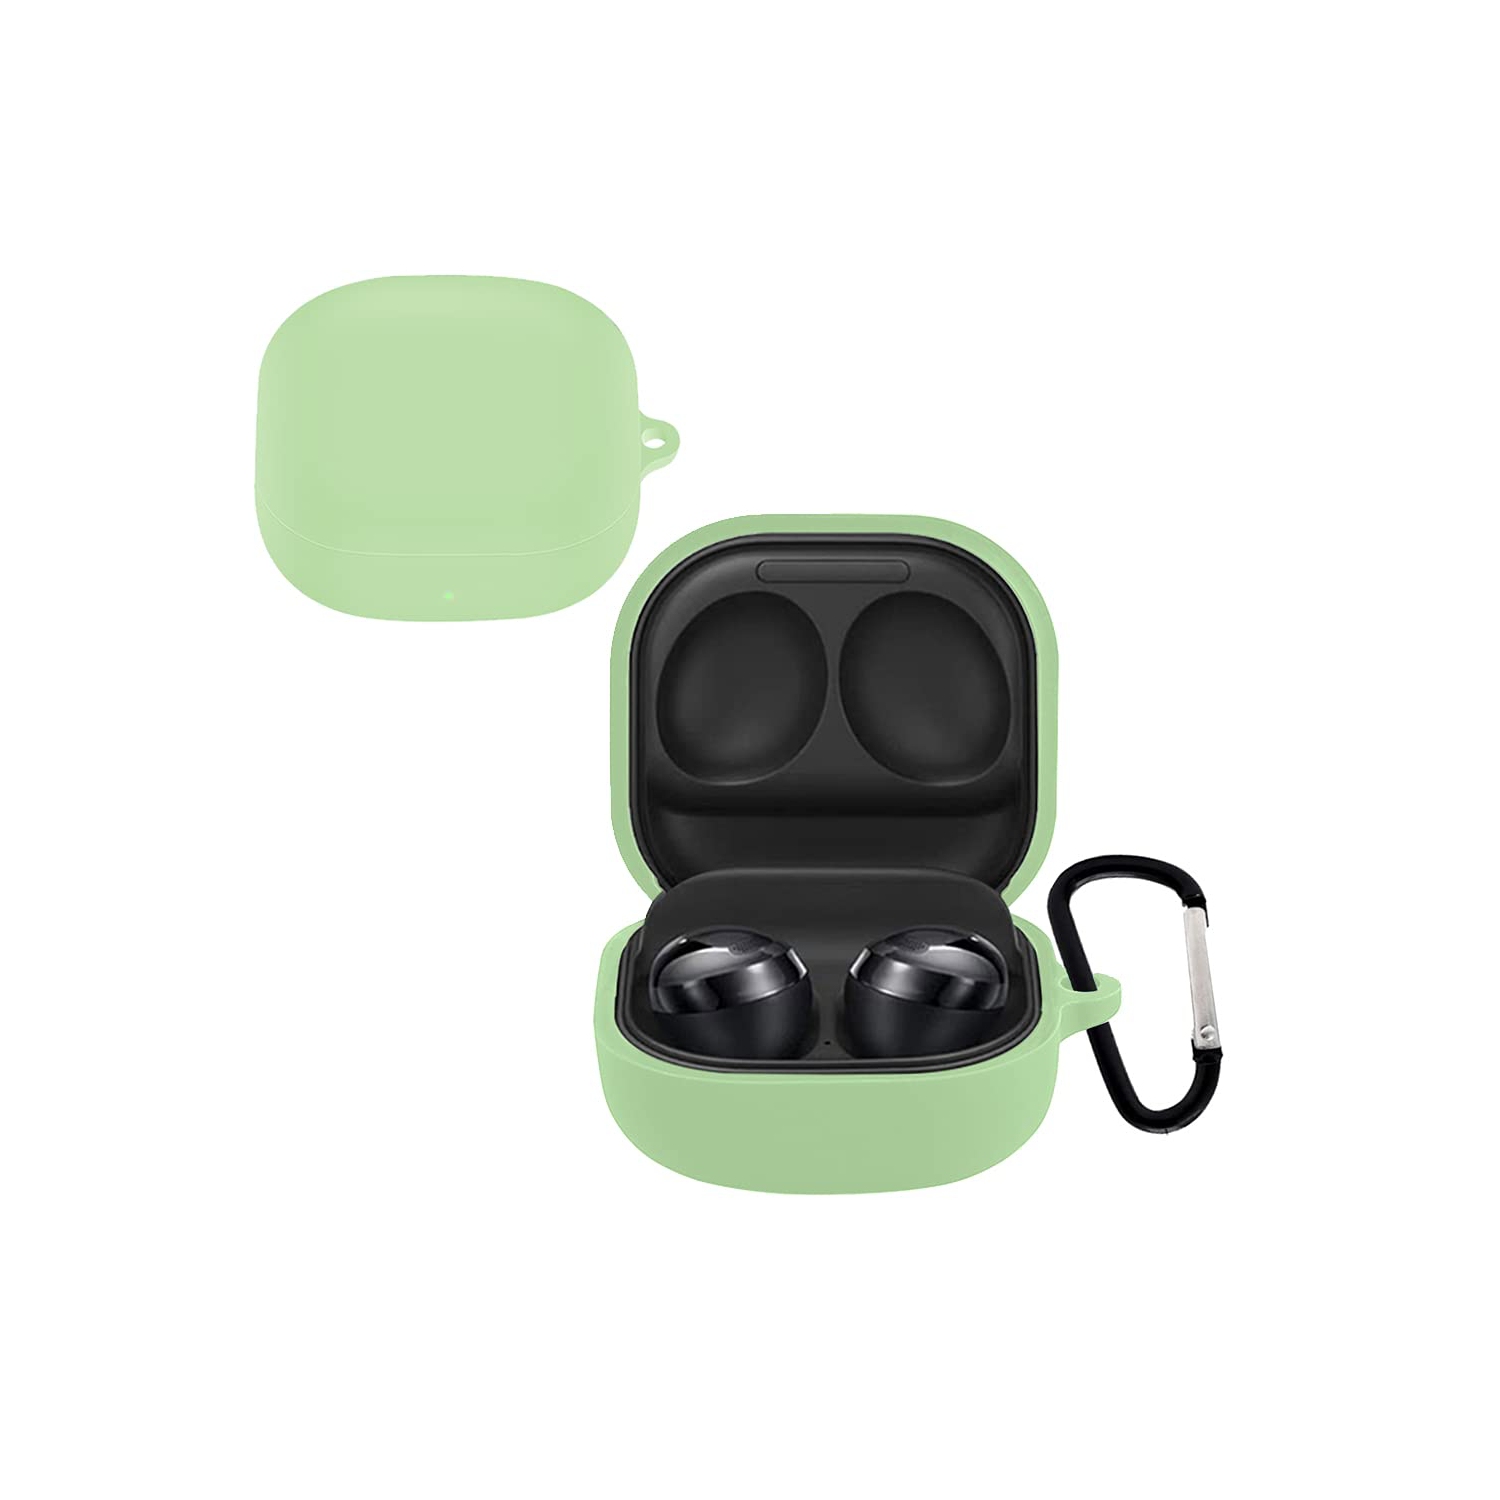 Silicone Case Cover for Samsung Galaxy Buds 2 PRO/Galaxy Buds 2/Galaxy Buds Live/Galaxy Buds PRO,Drop-Proof Shock Resistant Full Body Protective Cover with Carabiner(Matcha Green